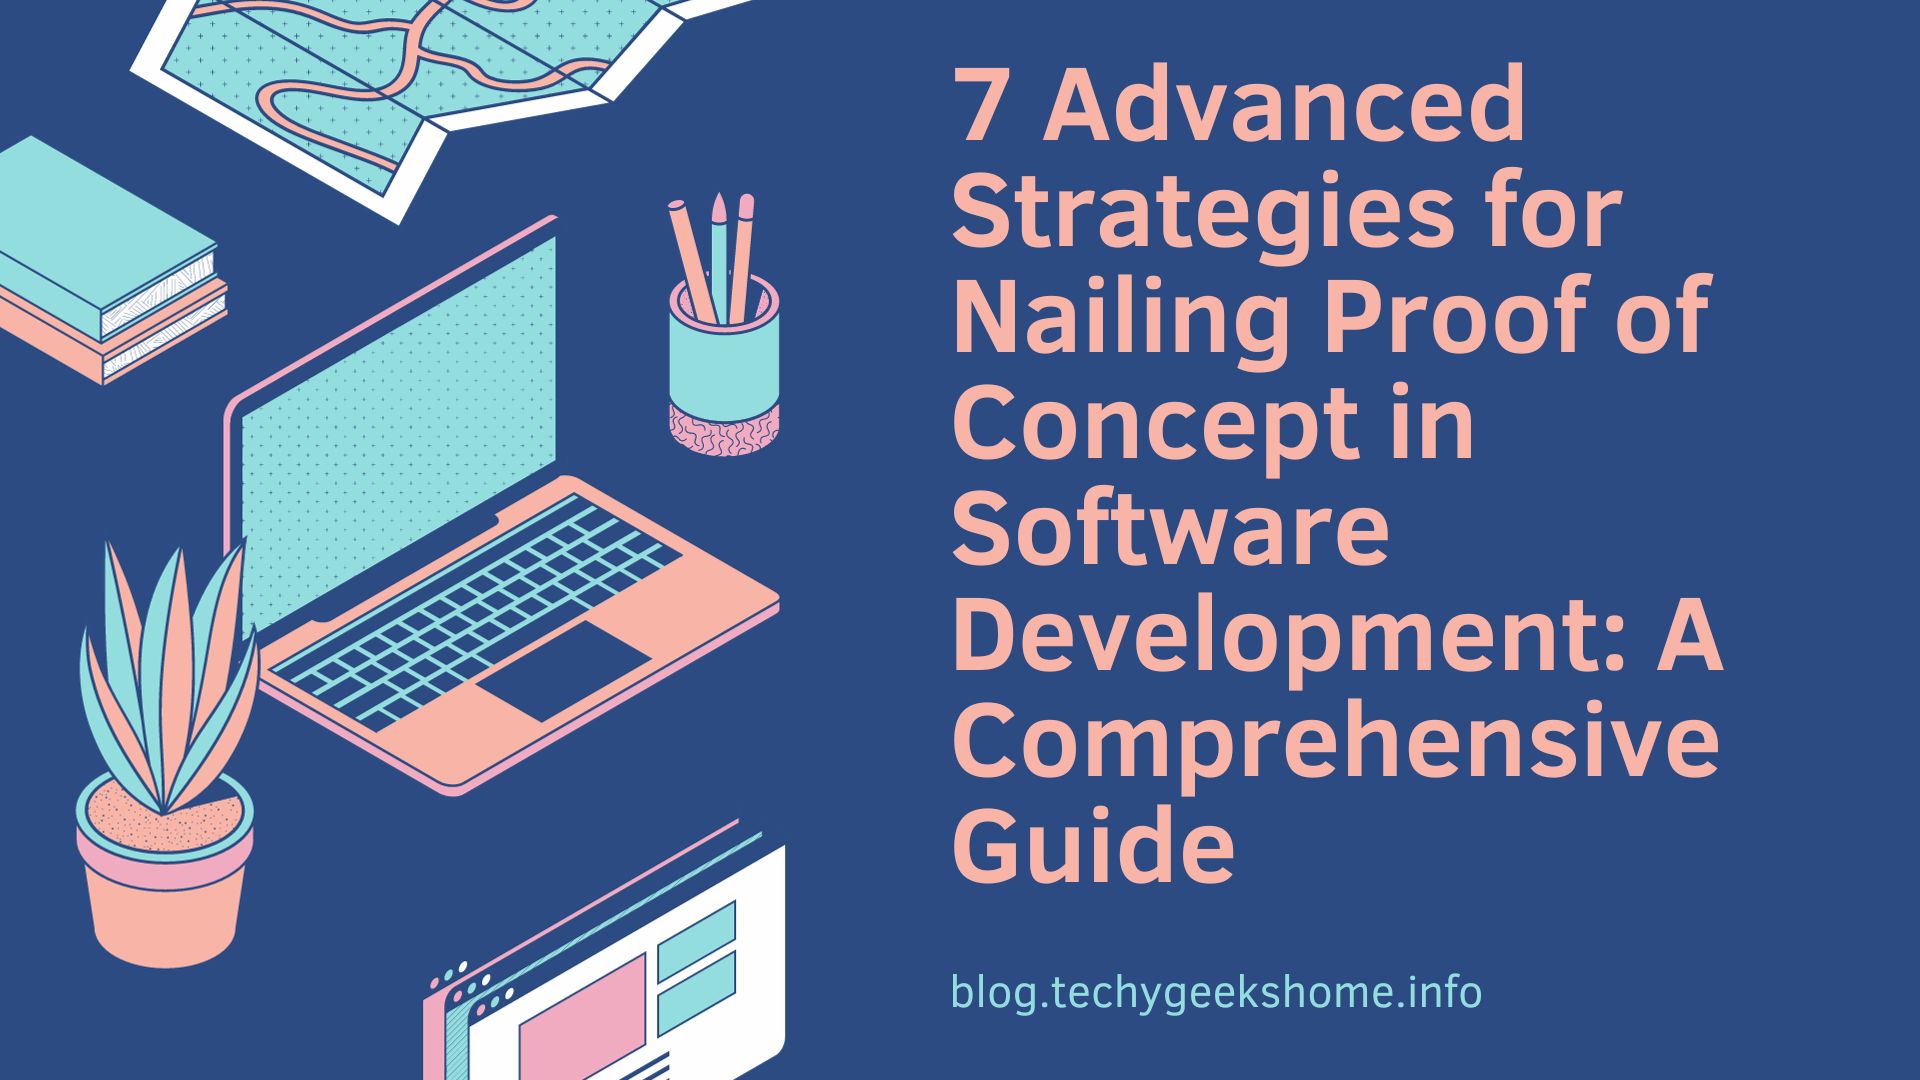 7 Advanced Strategies for Nailing Proof of Concept in Software Development: A Comprehensive Guide 4